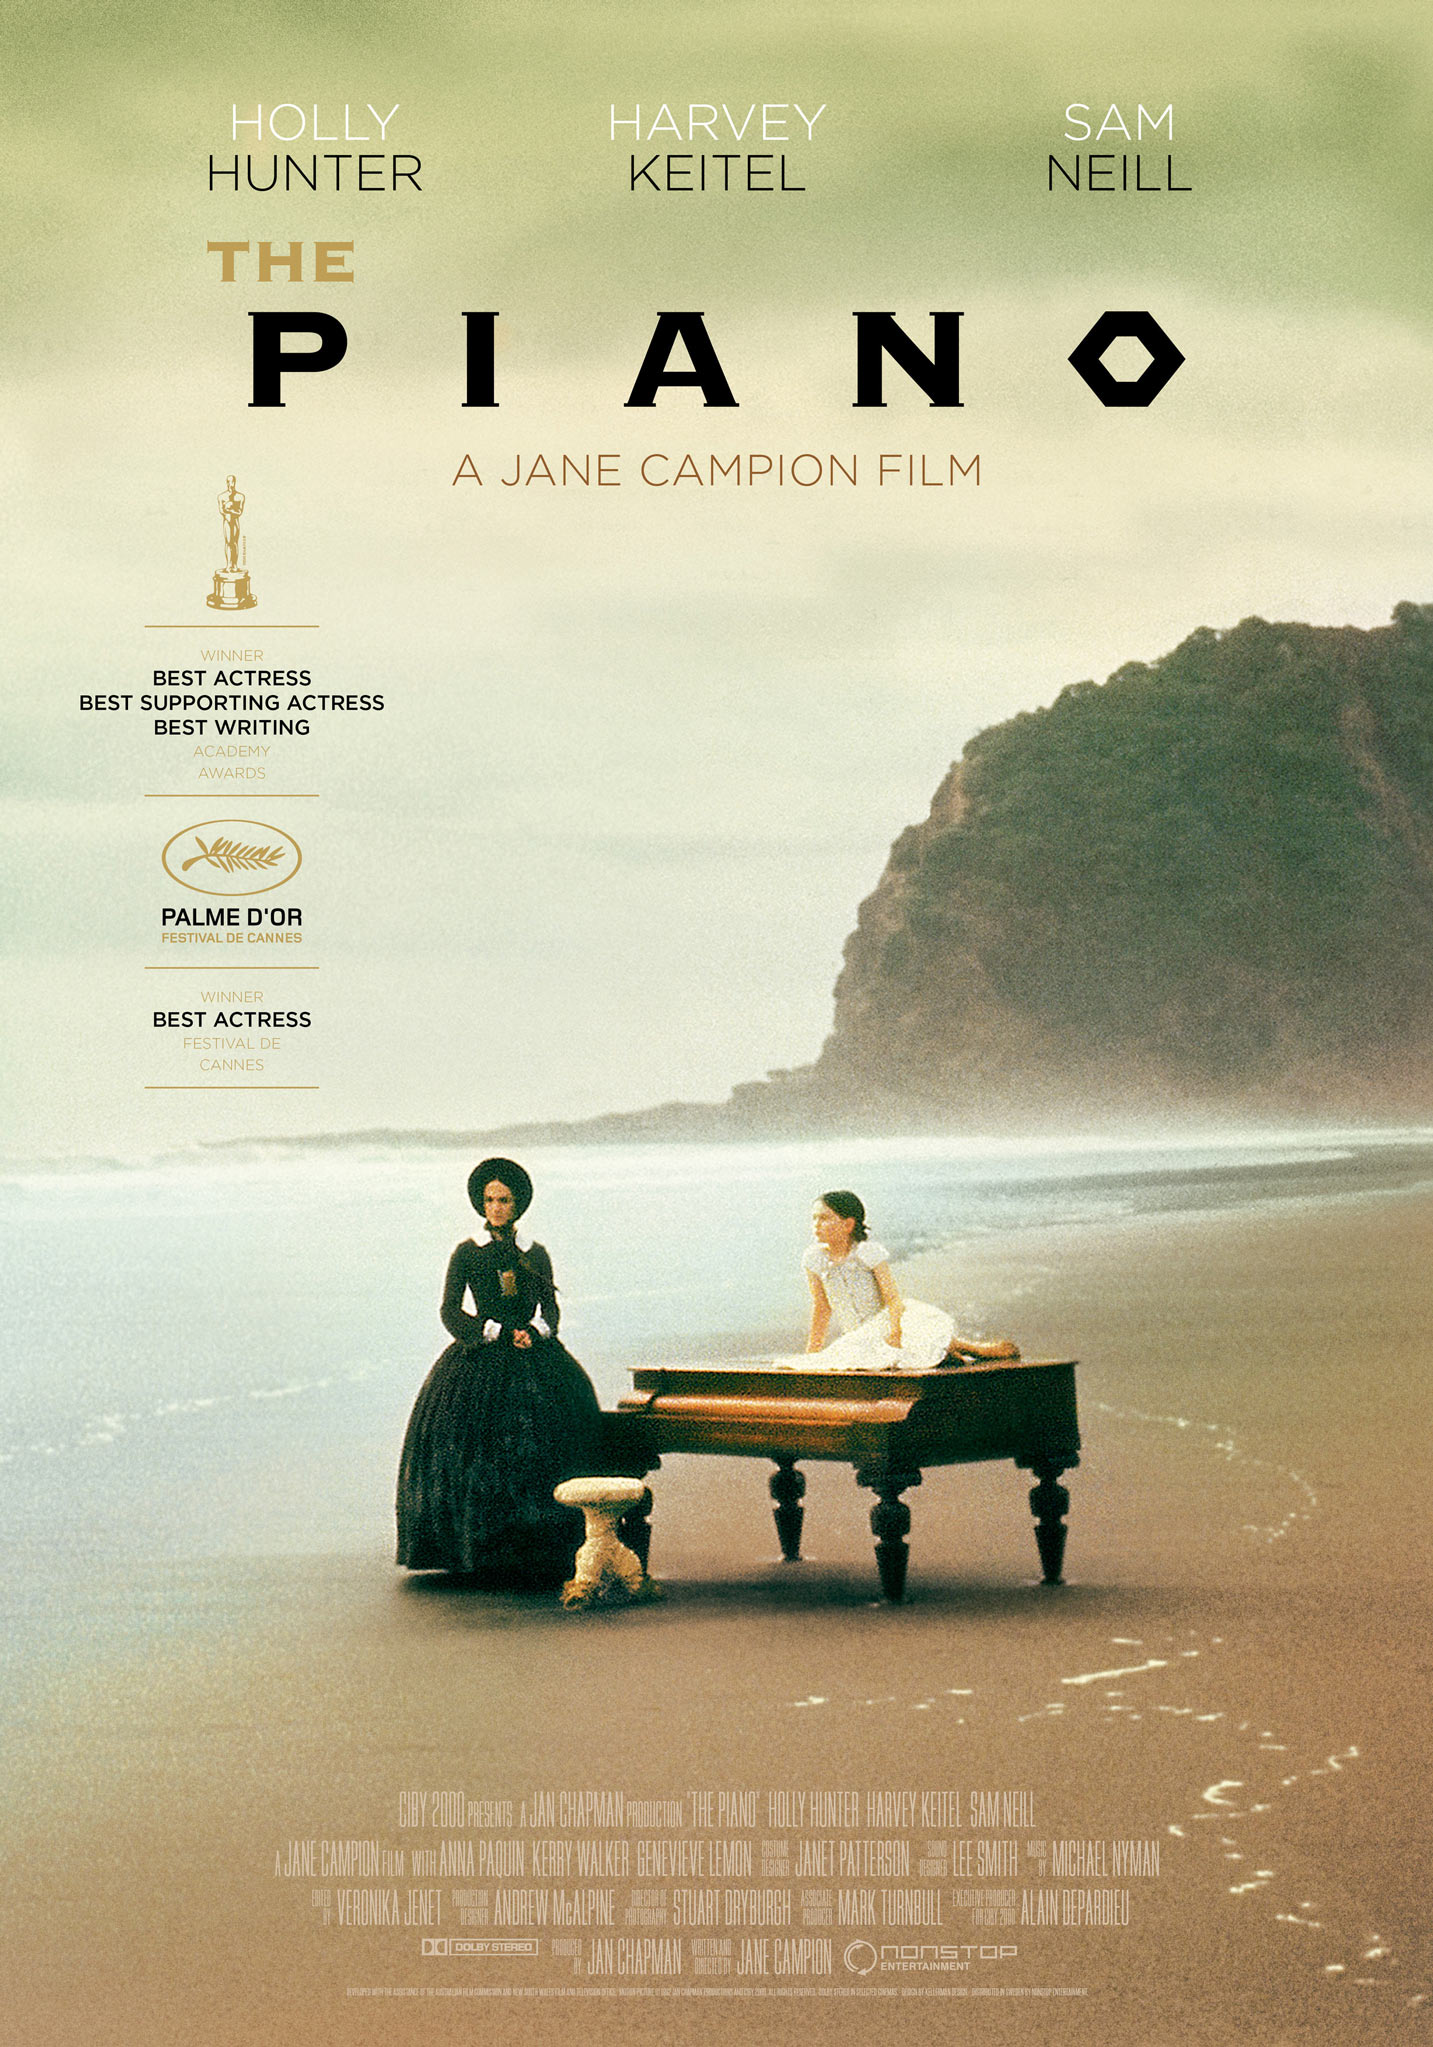 The Piano (1993) theatrical onesheet